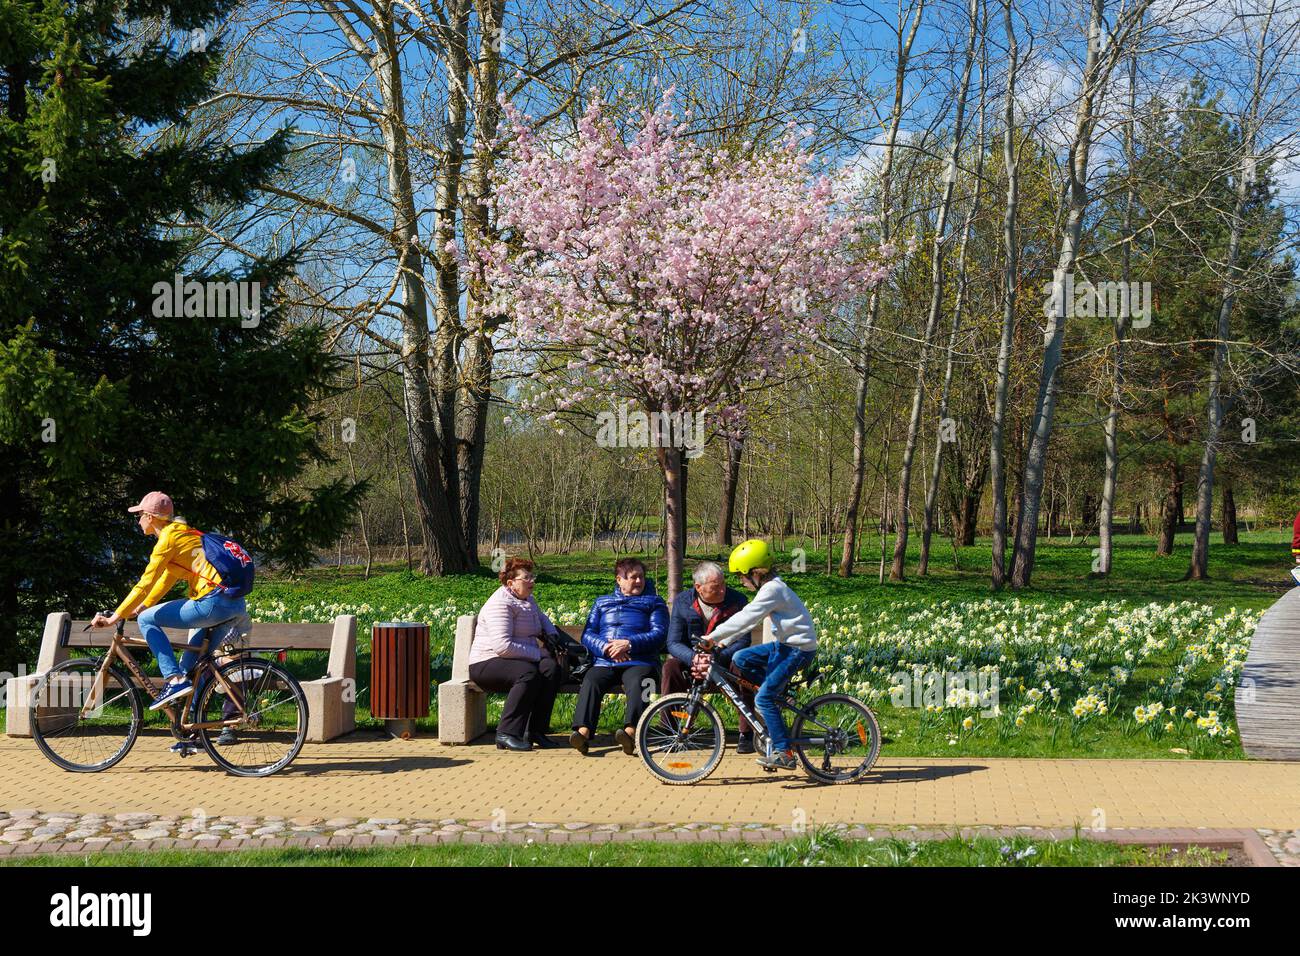 Druskininkai, Lithuania - April 21, 2018: People resting in the Park, which traditionally every spring bloom thousands of daffodils. Stock Photo